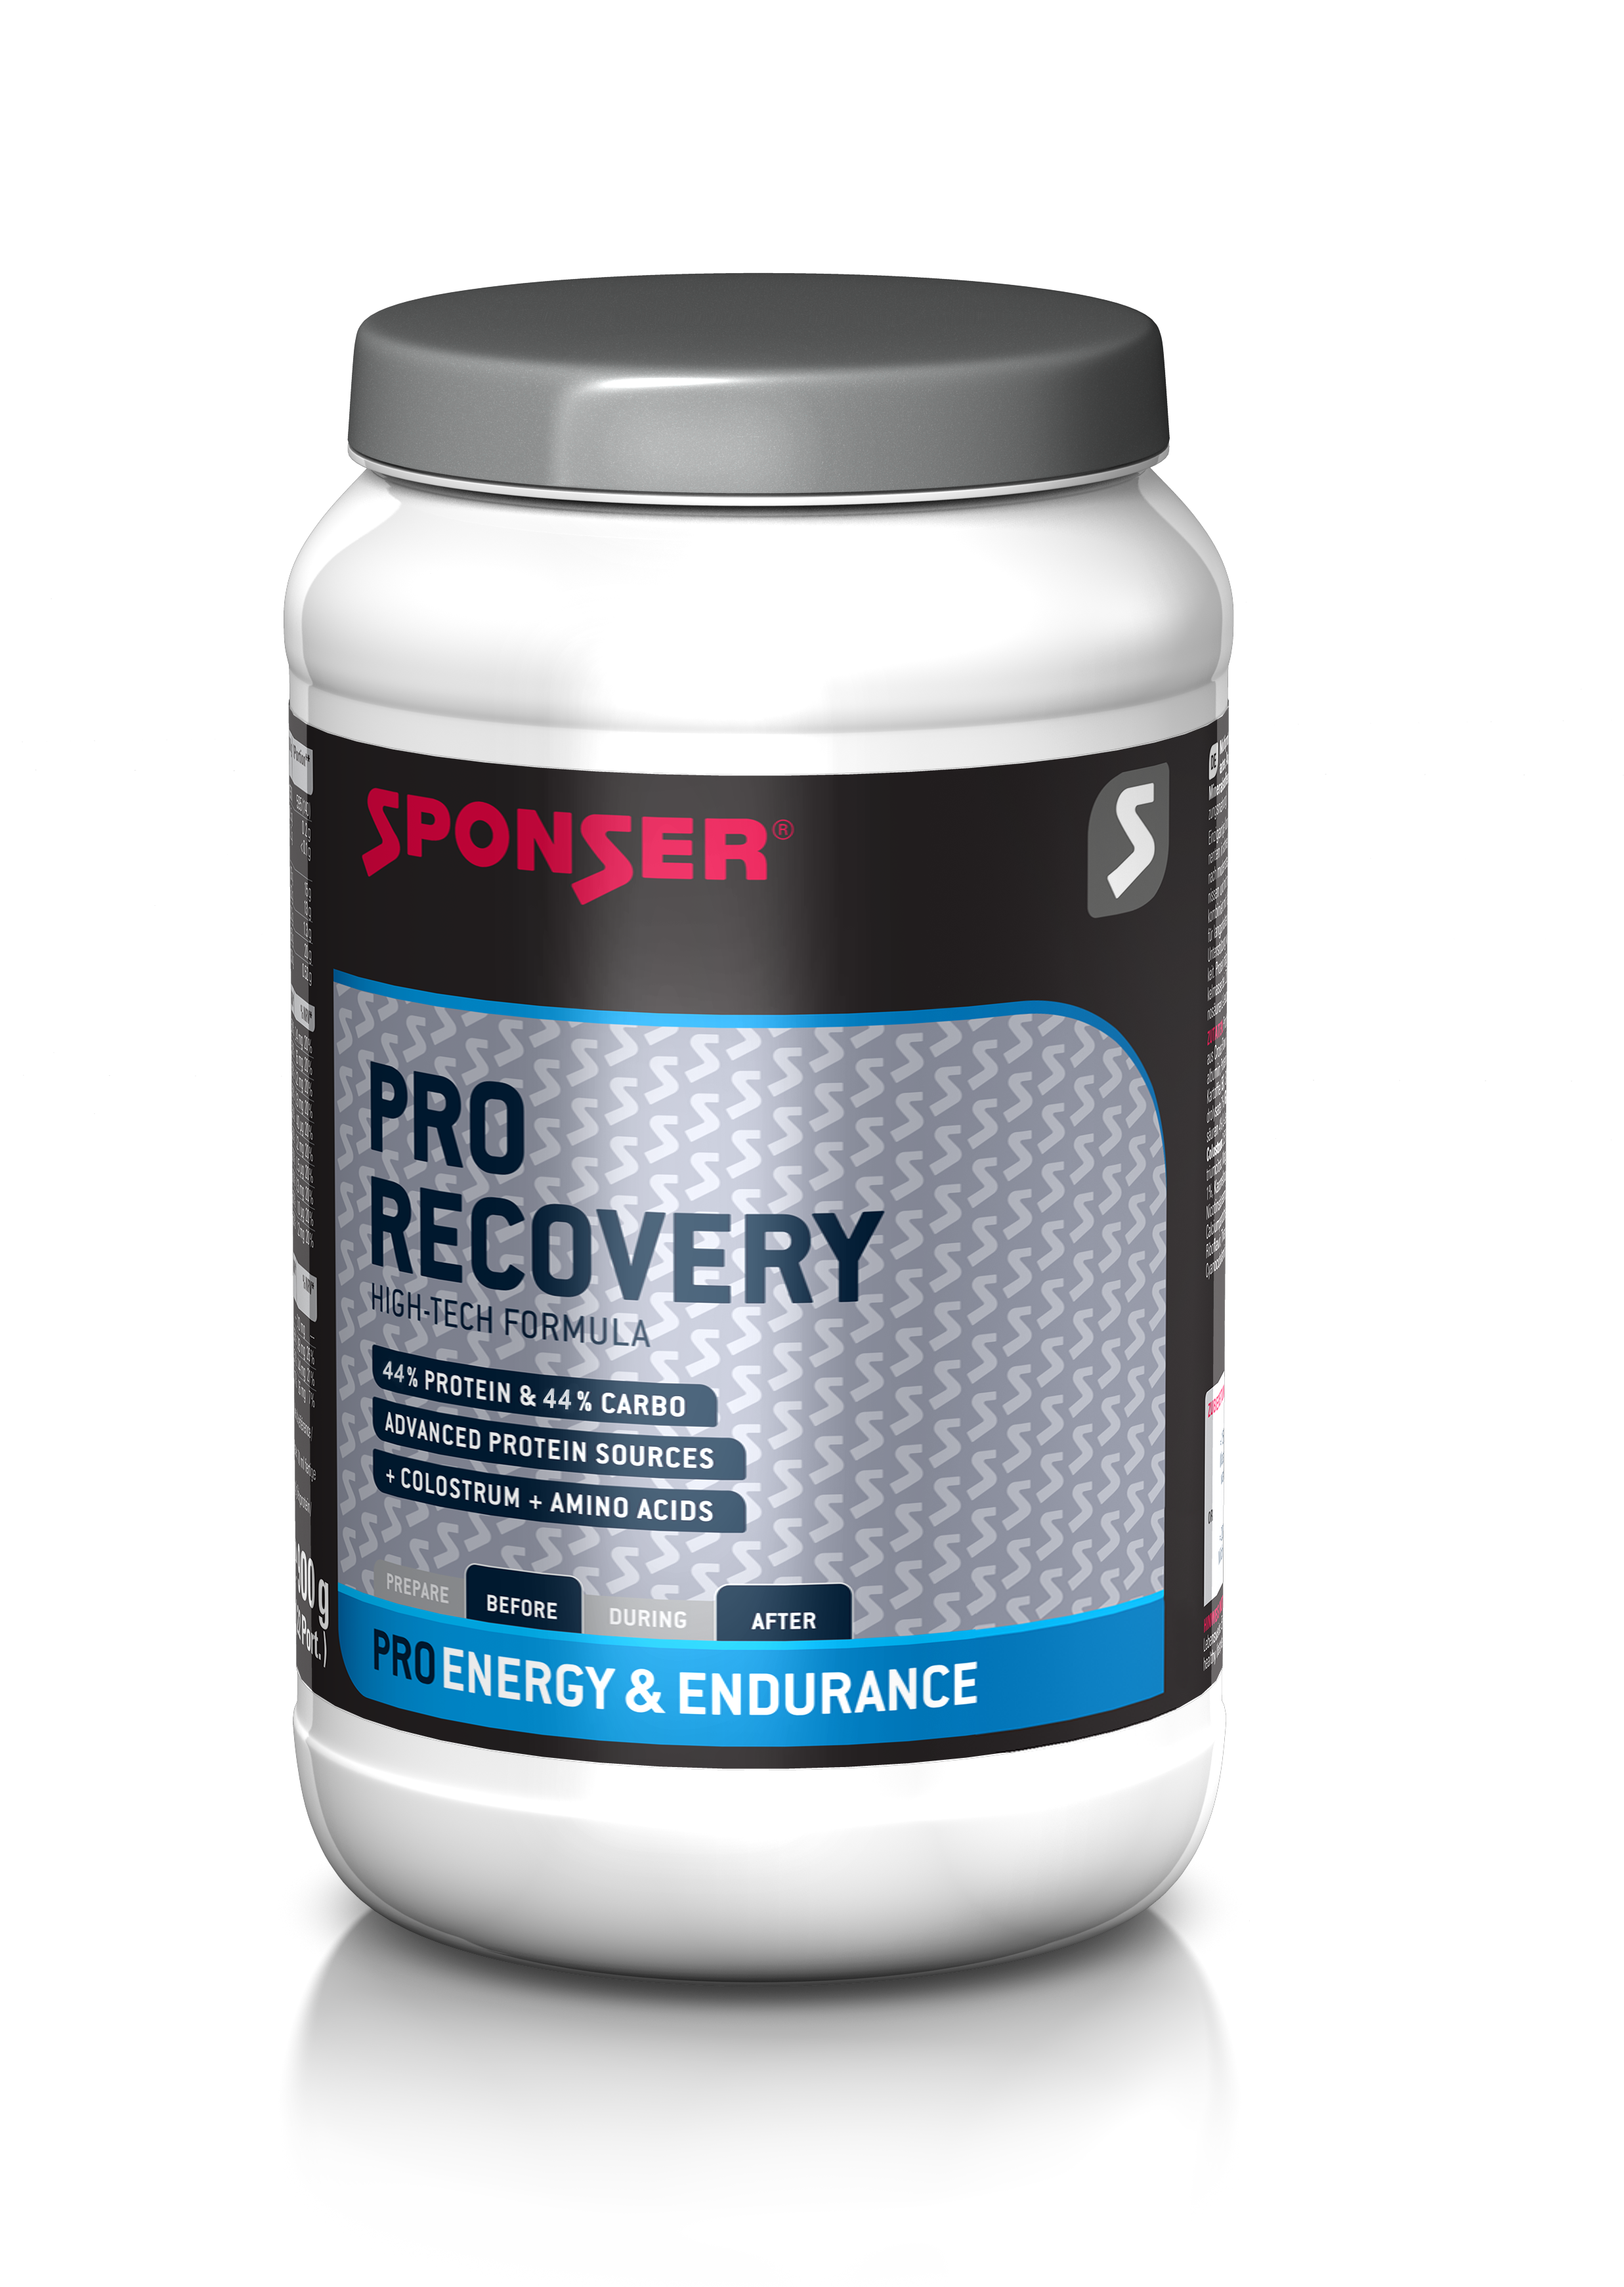 Sponser Power 44/44 Pro Recovery Chocolate - 800 g.